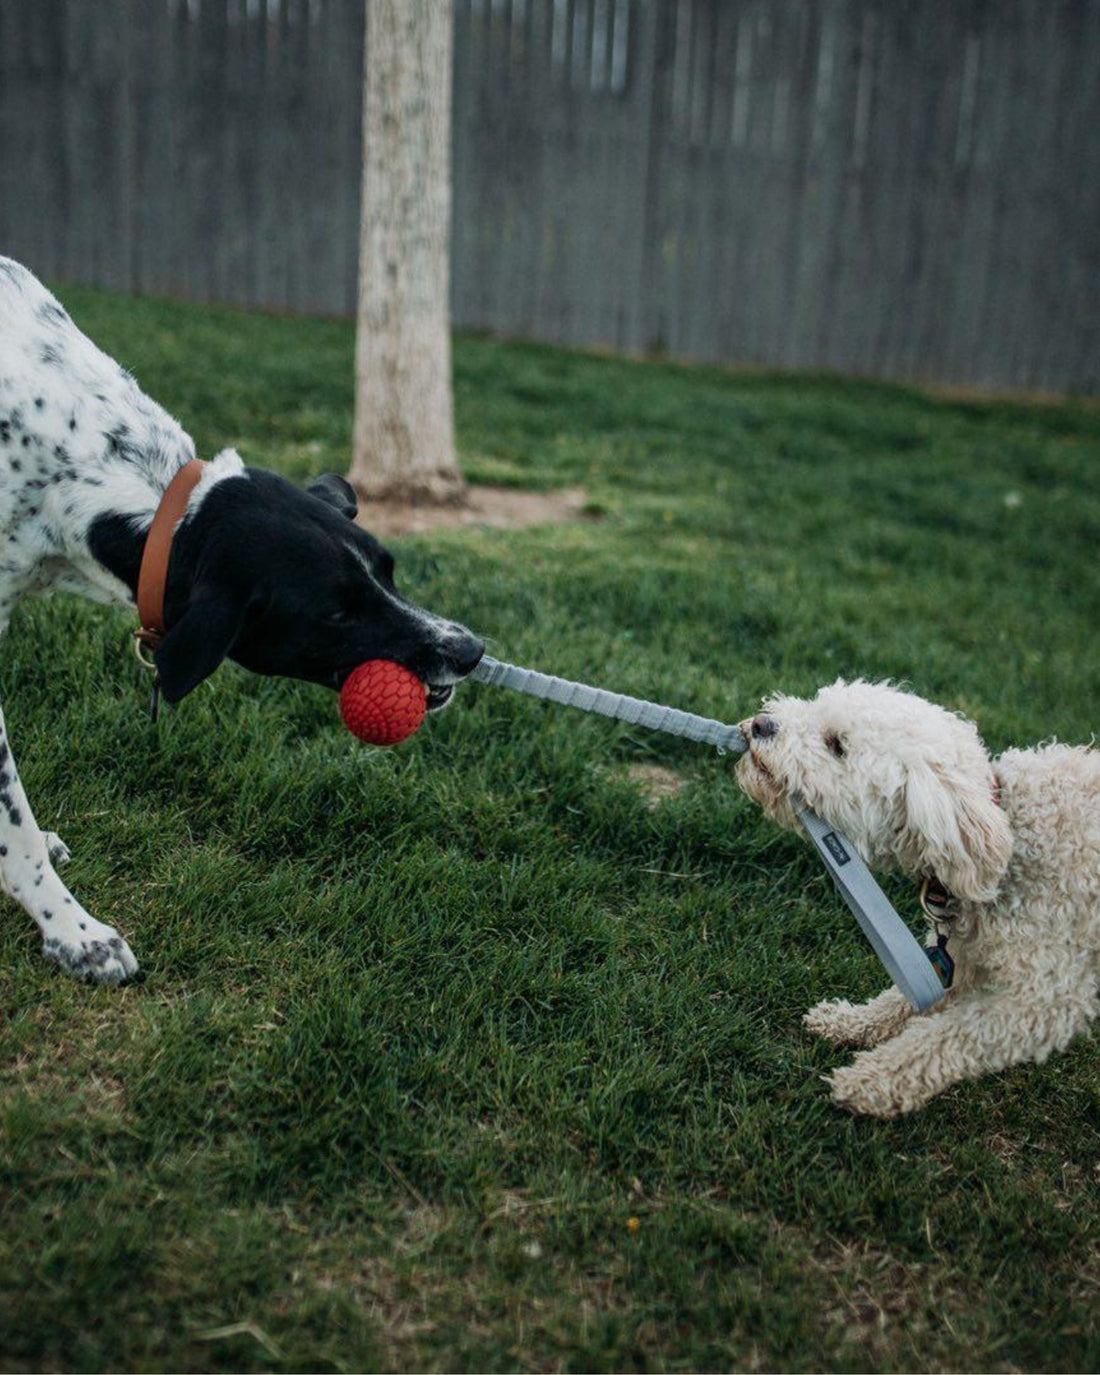 two dogs playing tug-o-war with the n-gage bungee handler toy